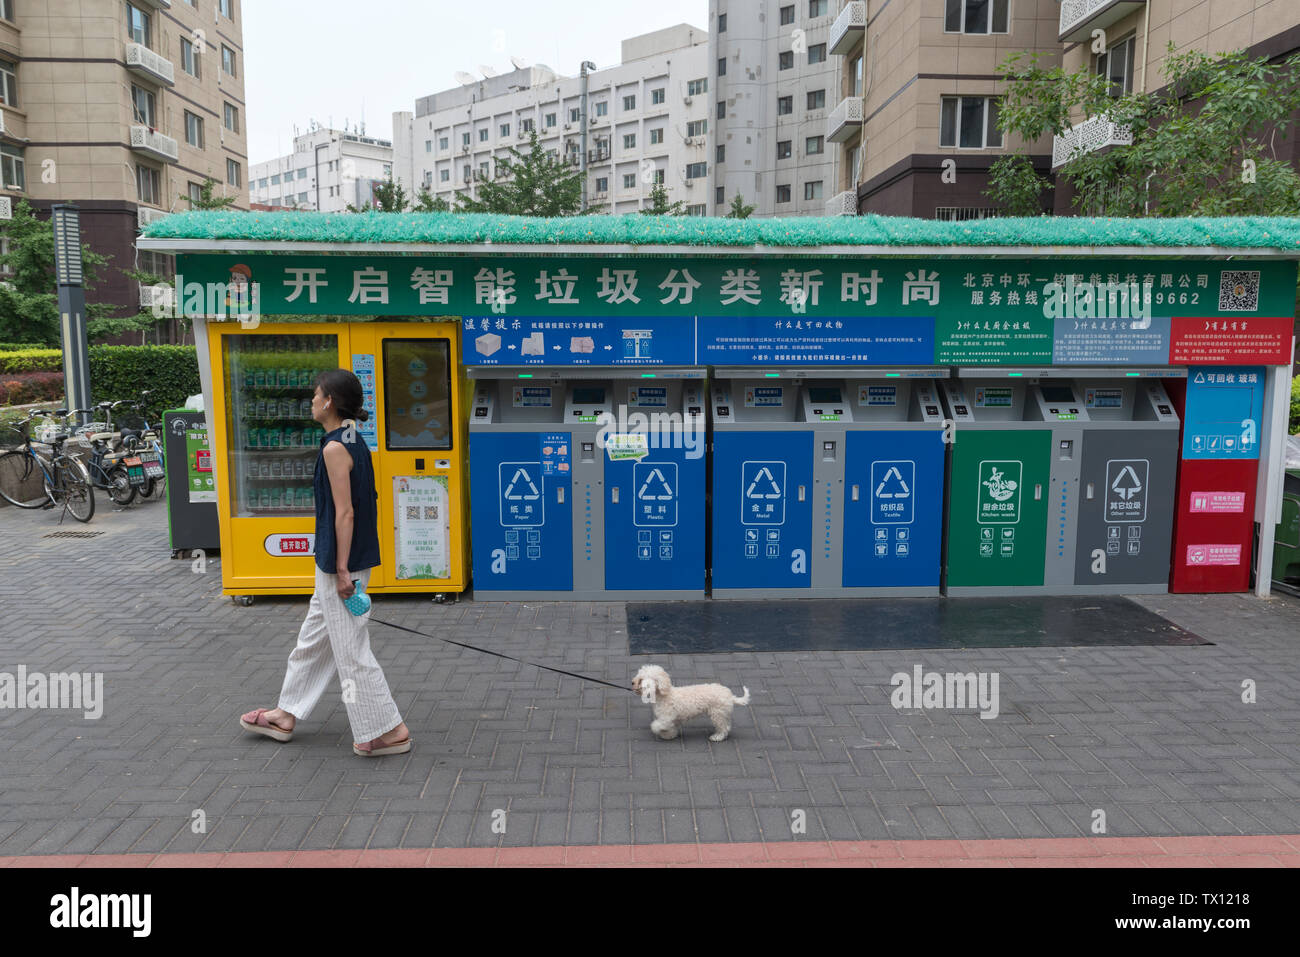 A woman walks a dog past the smart garbage-sorting dustbins in a residential compound in Beijing, China. Jun 23, 2019 Stock Photo